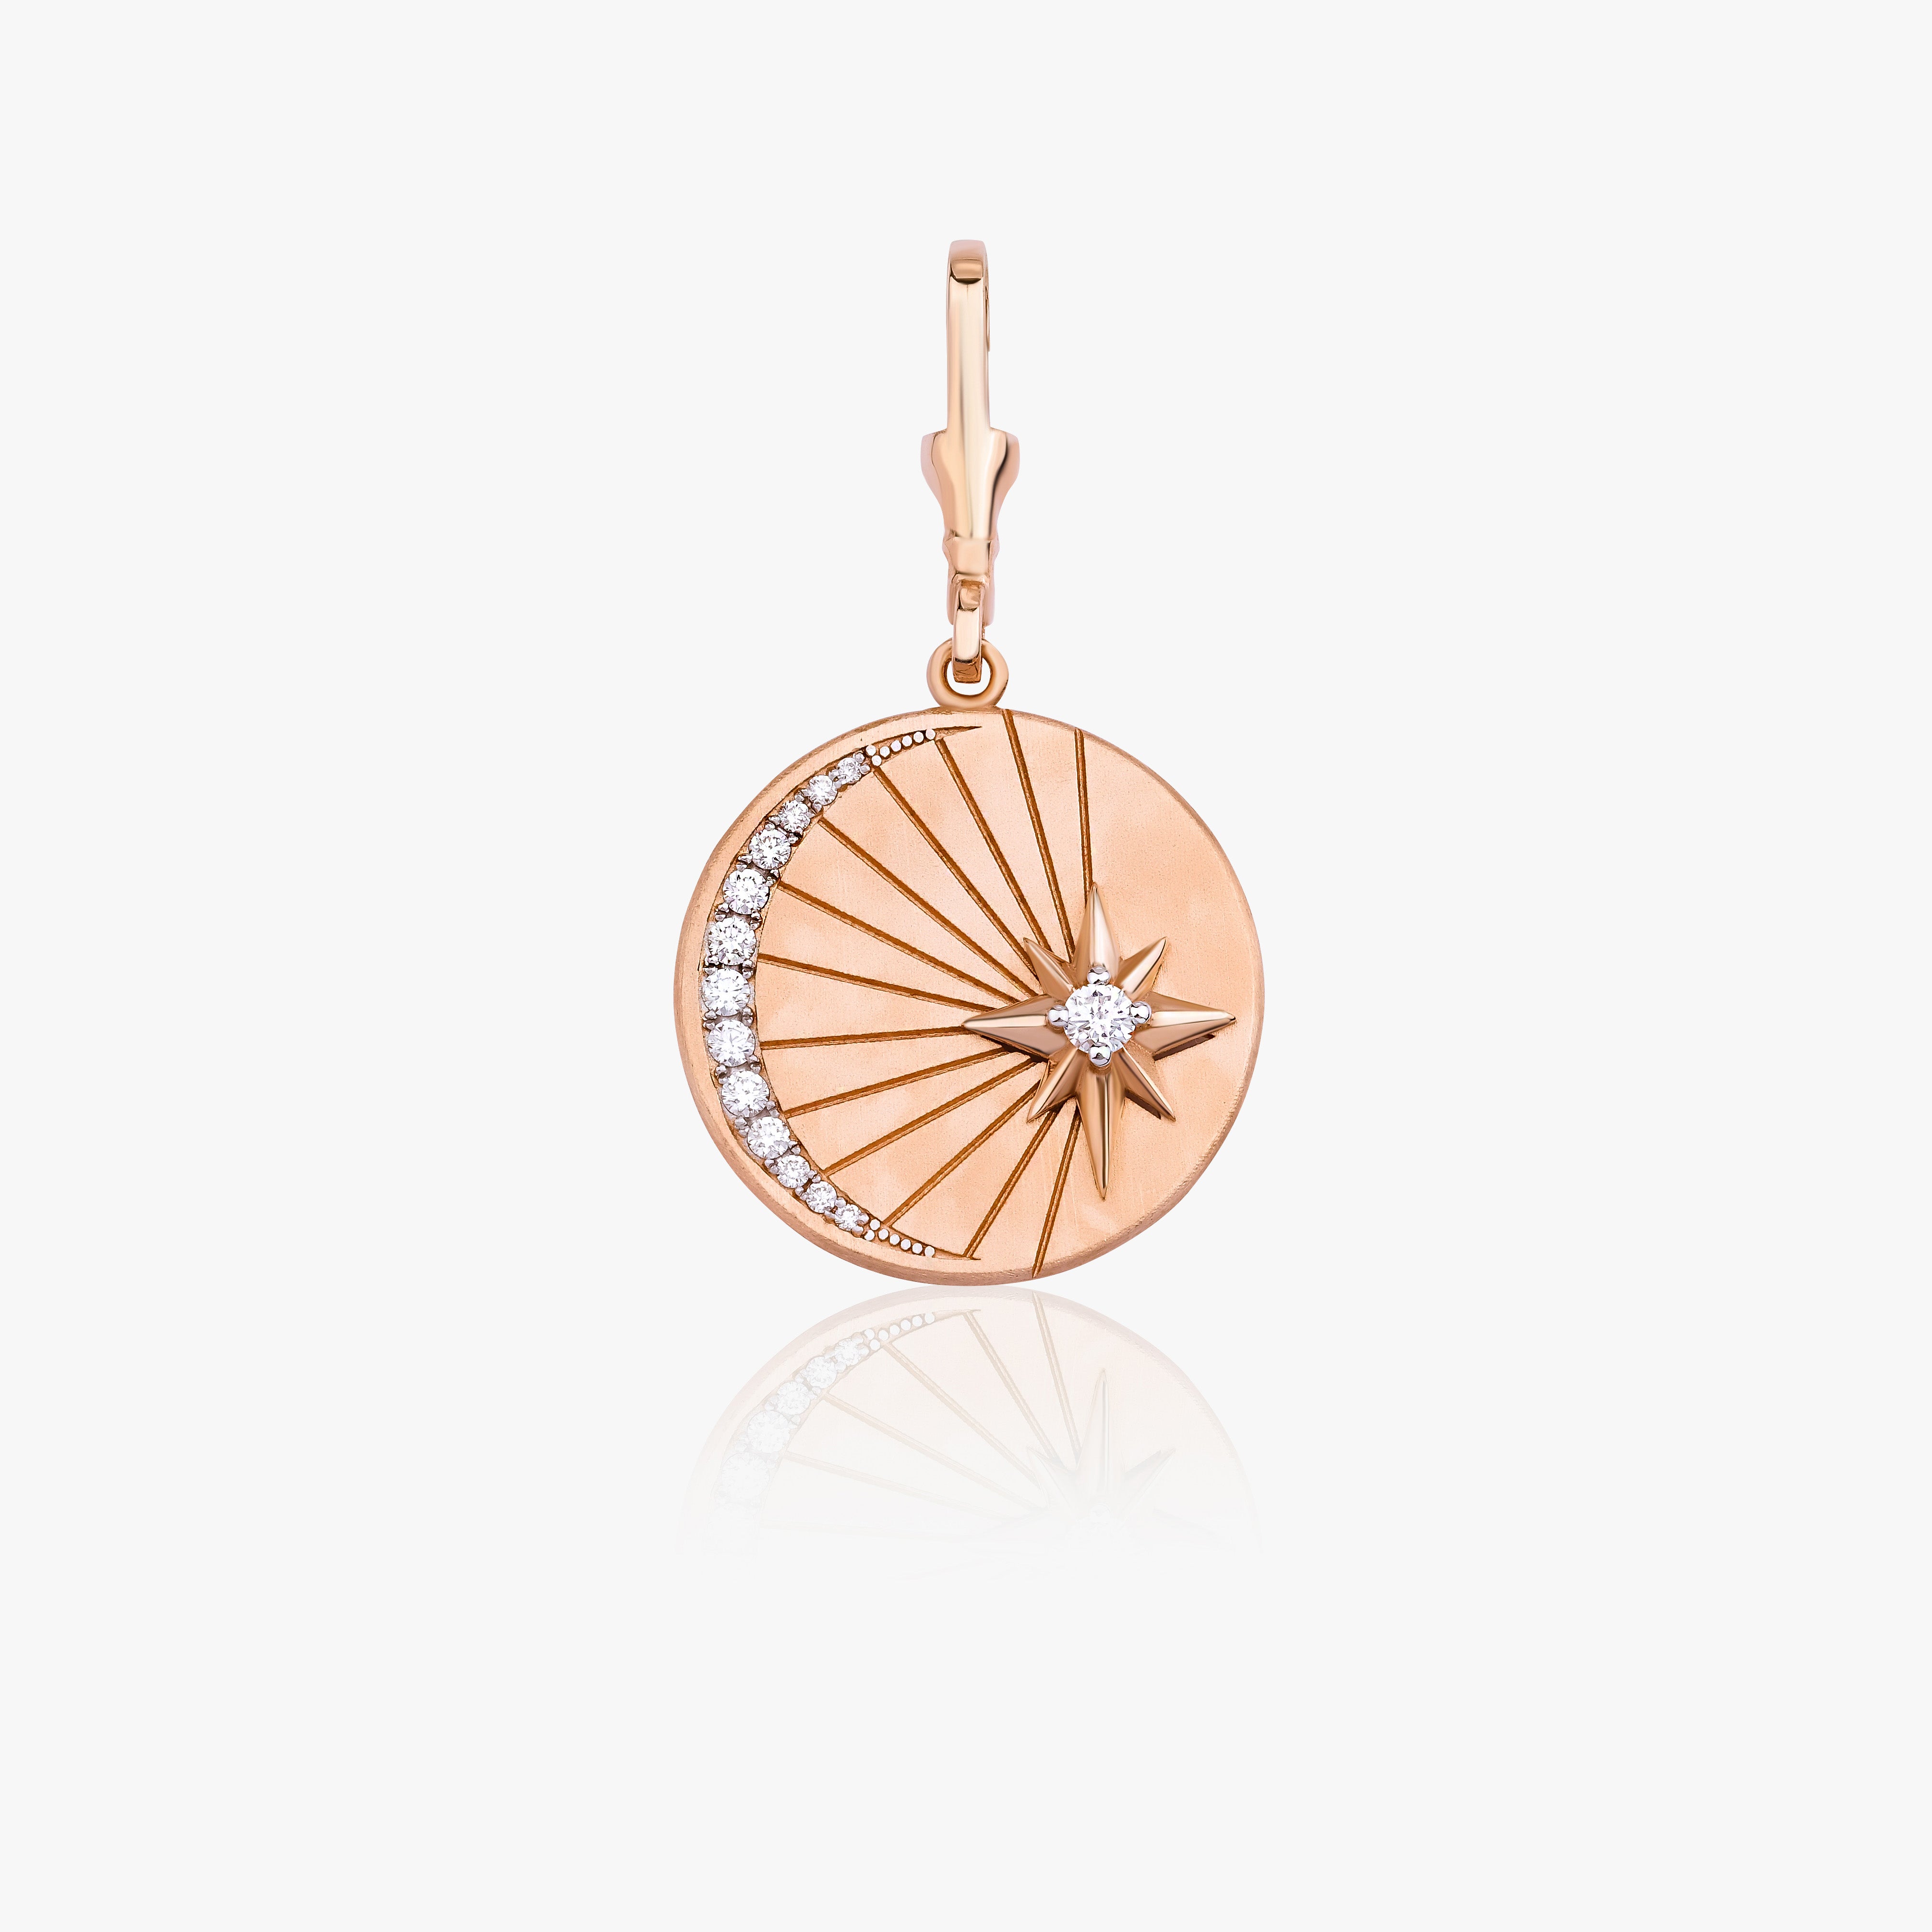 Diamond Crescent Moon and North Star Medallion Pendant Available in 14K and 18K Gold